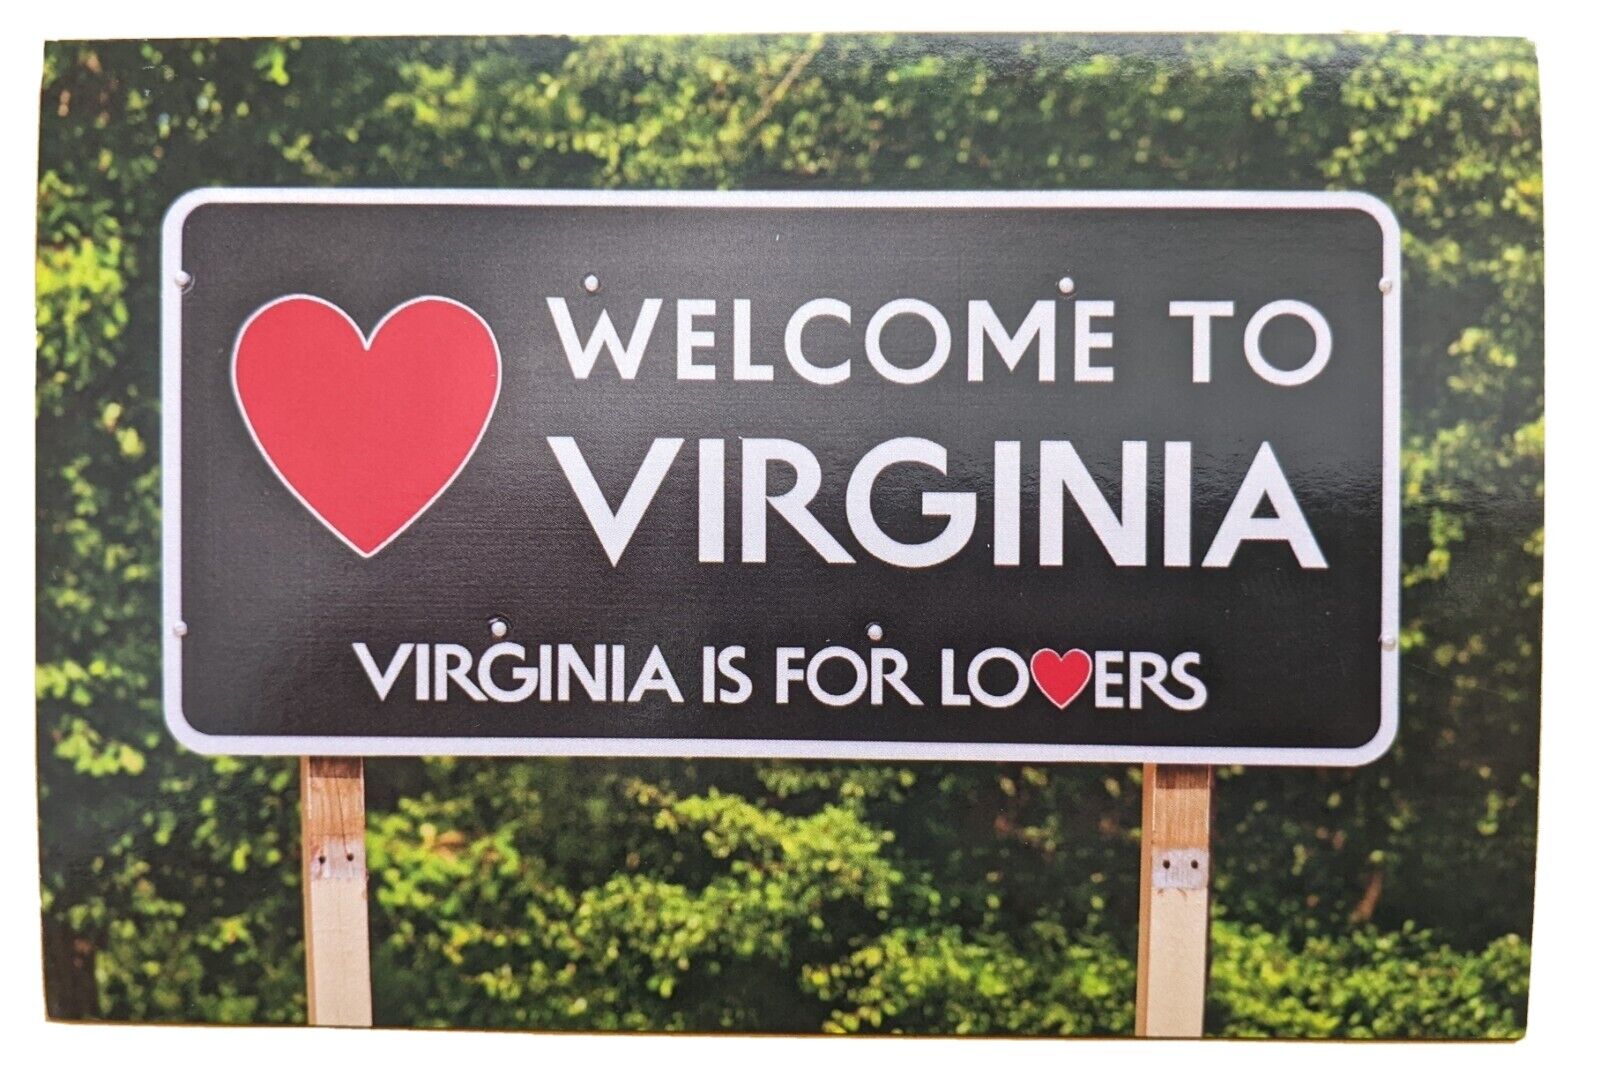 Virginia postcard. Welcome to Virginia. Virginia is for lovers ❤️